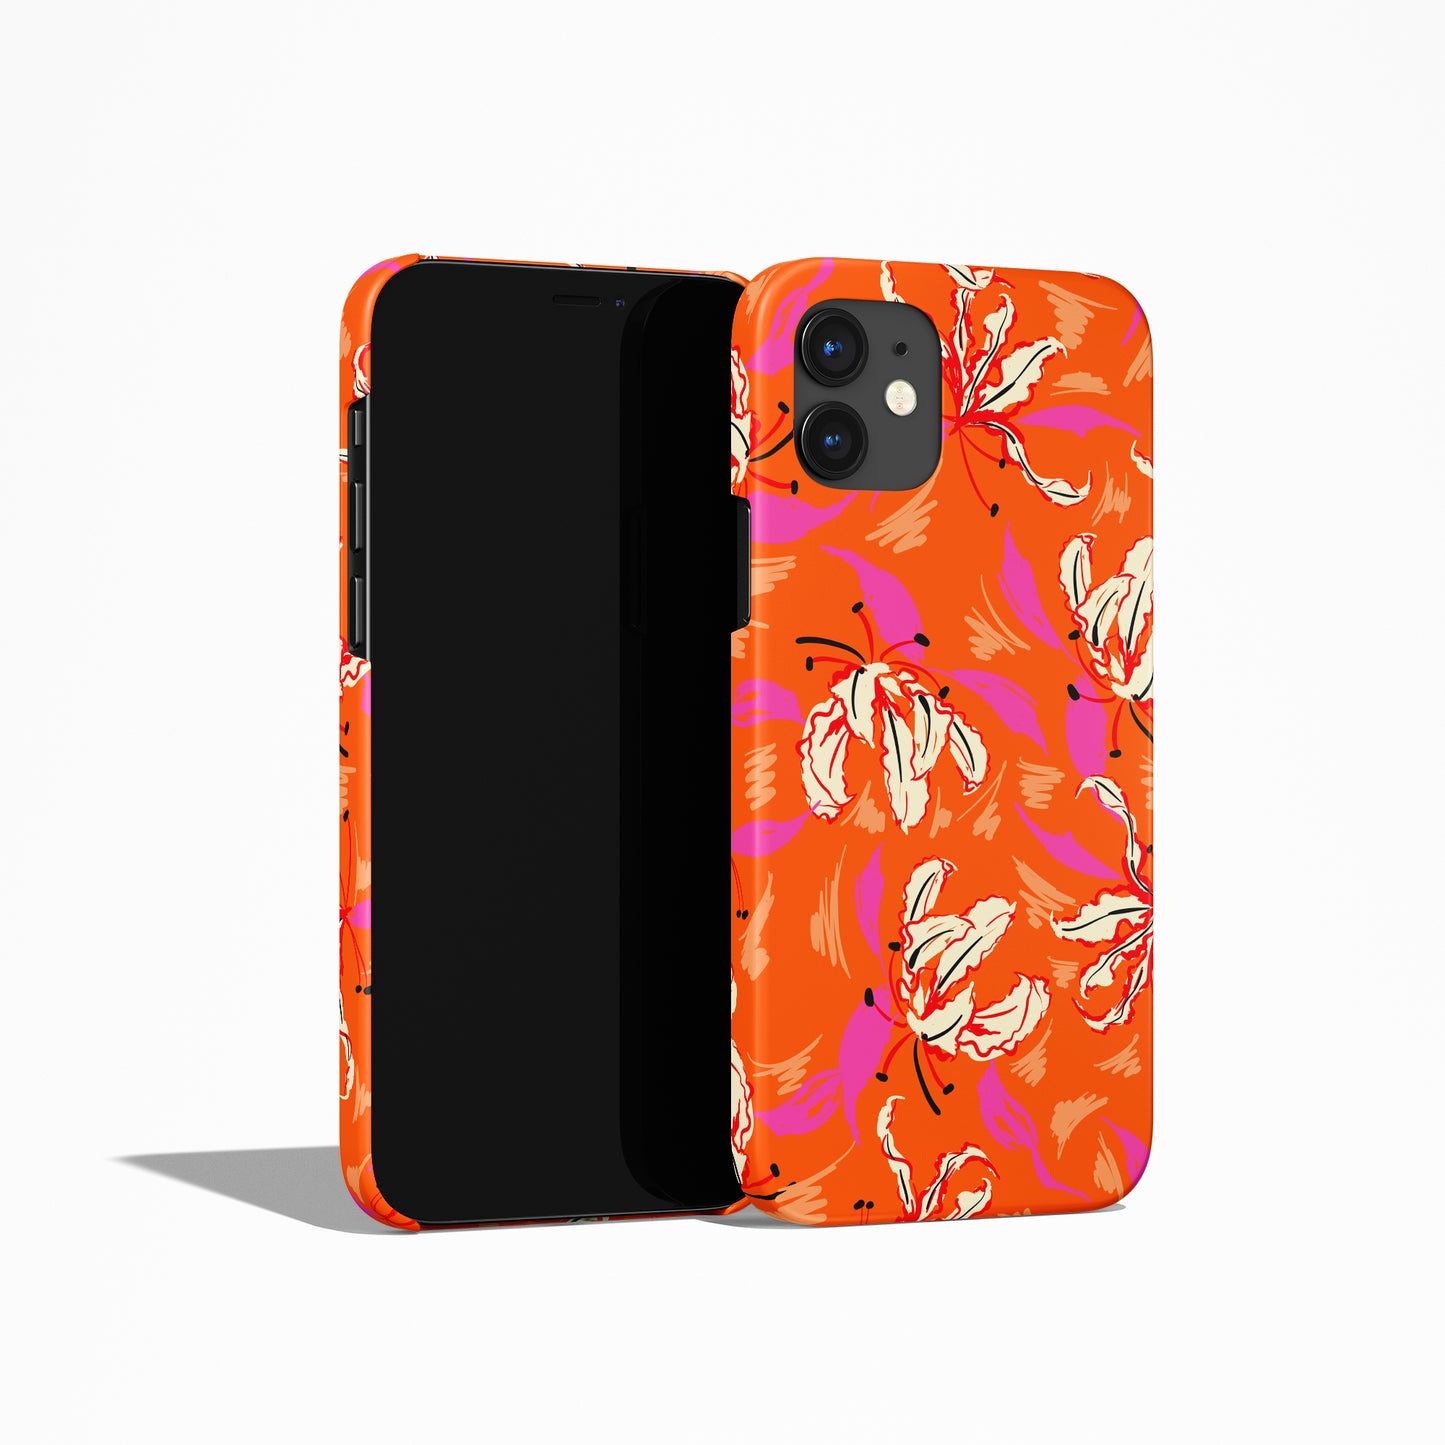 Exotic Colorful iPhone Case